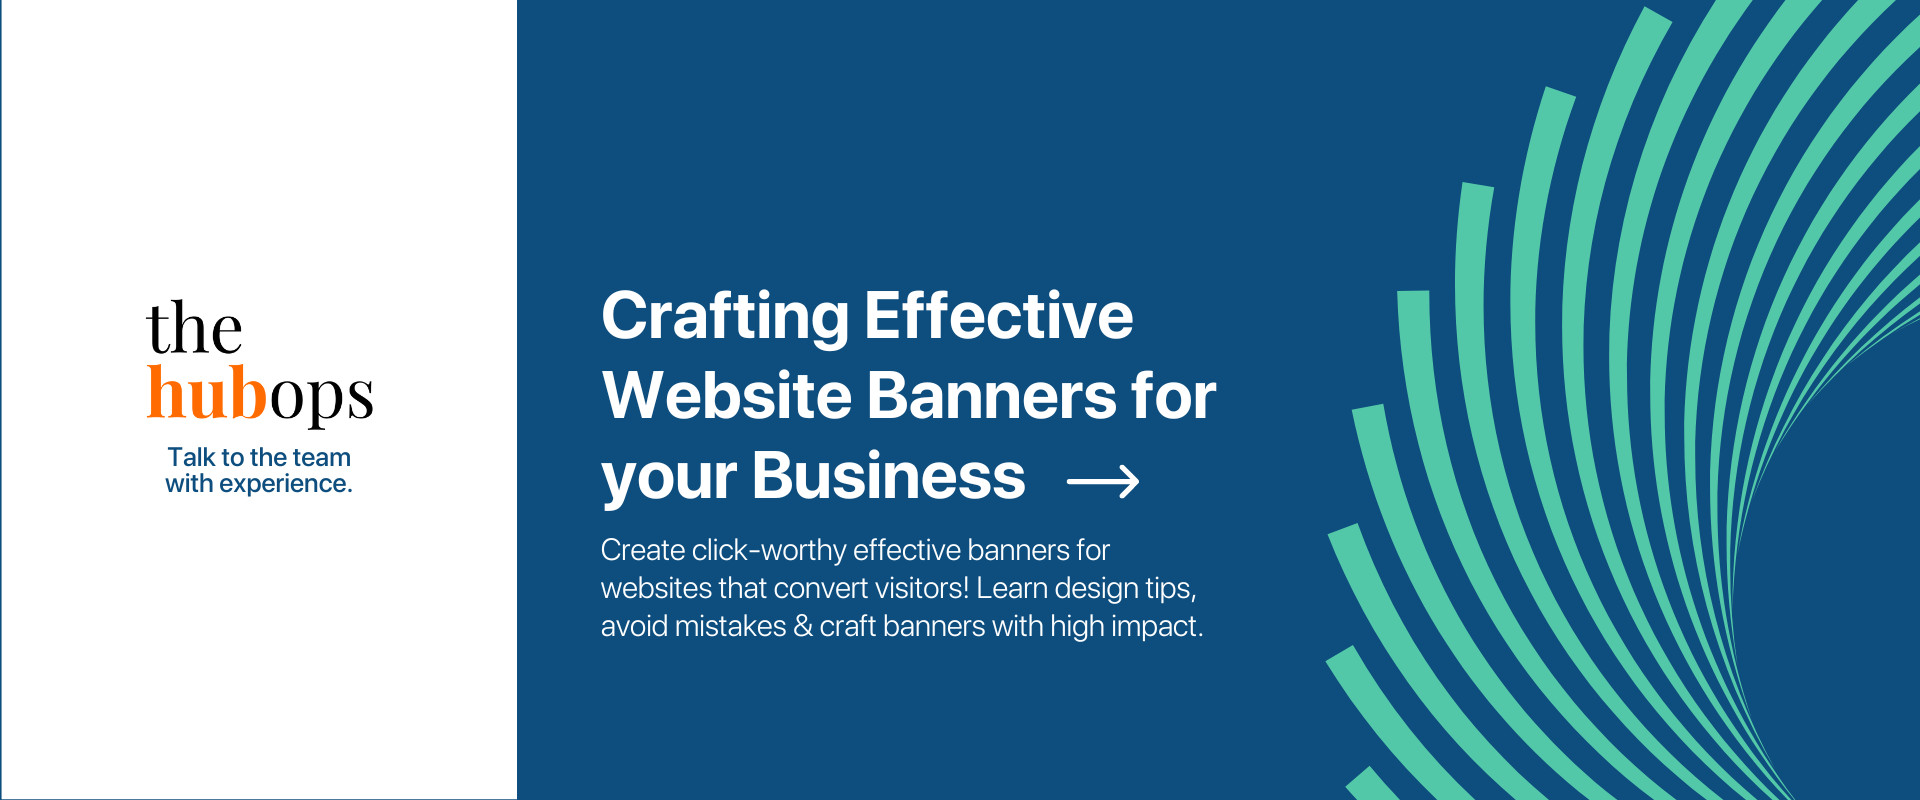 Effective Website Banners - The HubOps